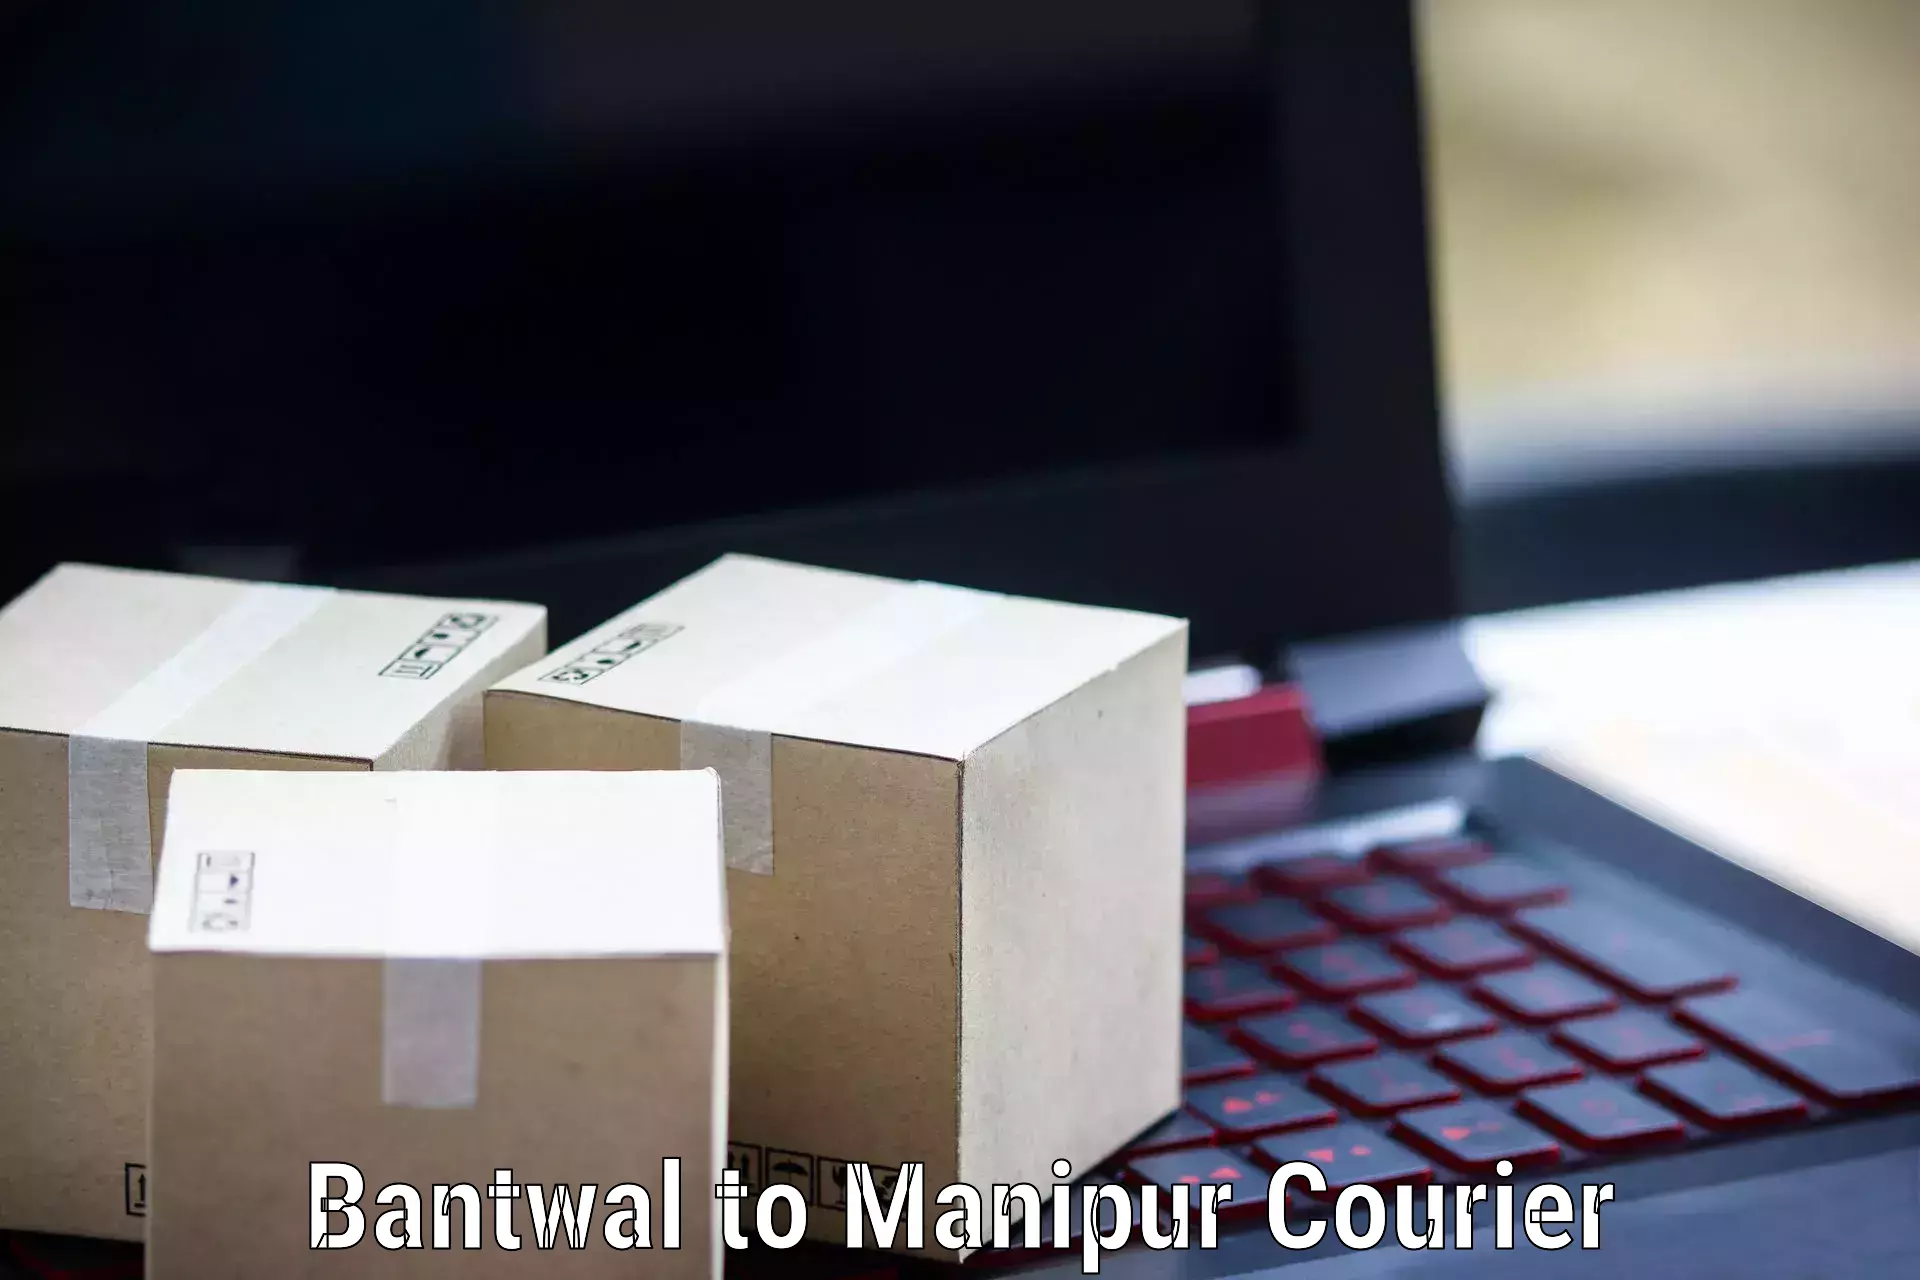 Urban courier service Bantwal to Ukhrul